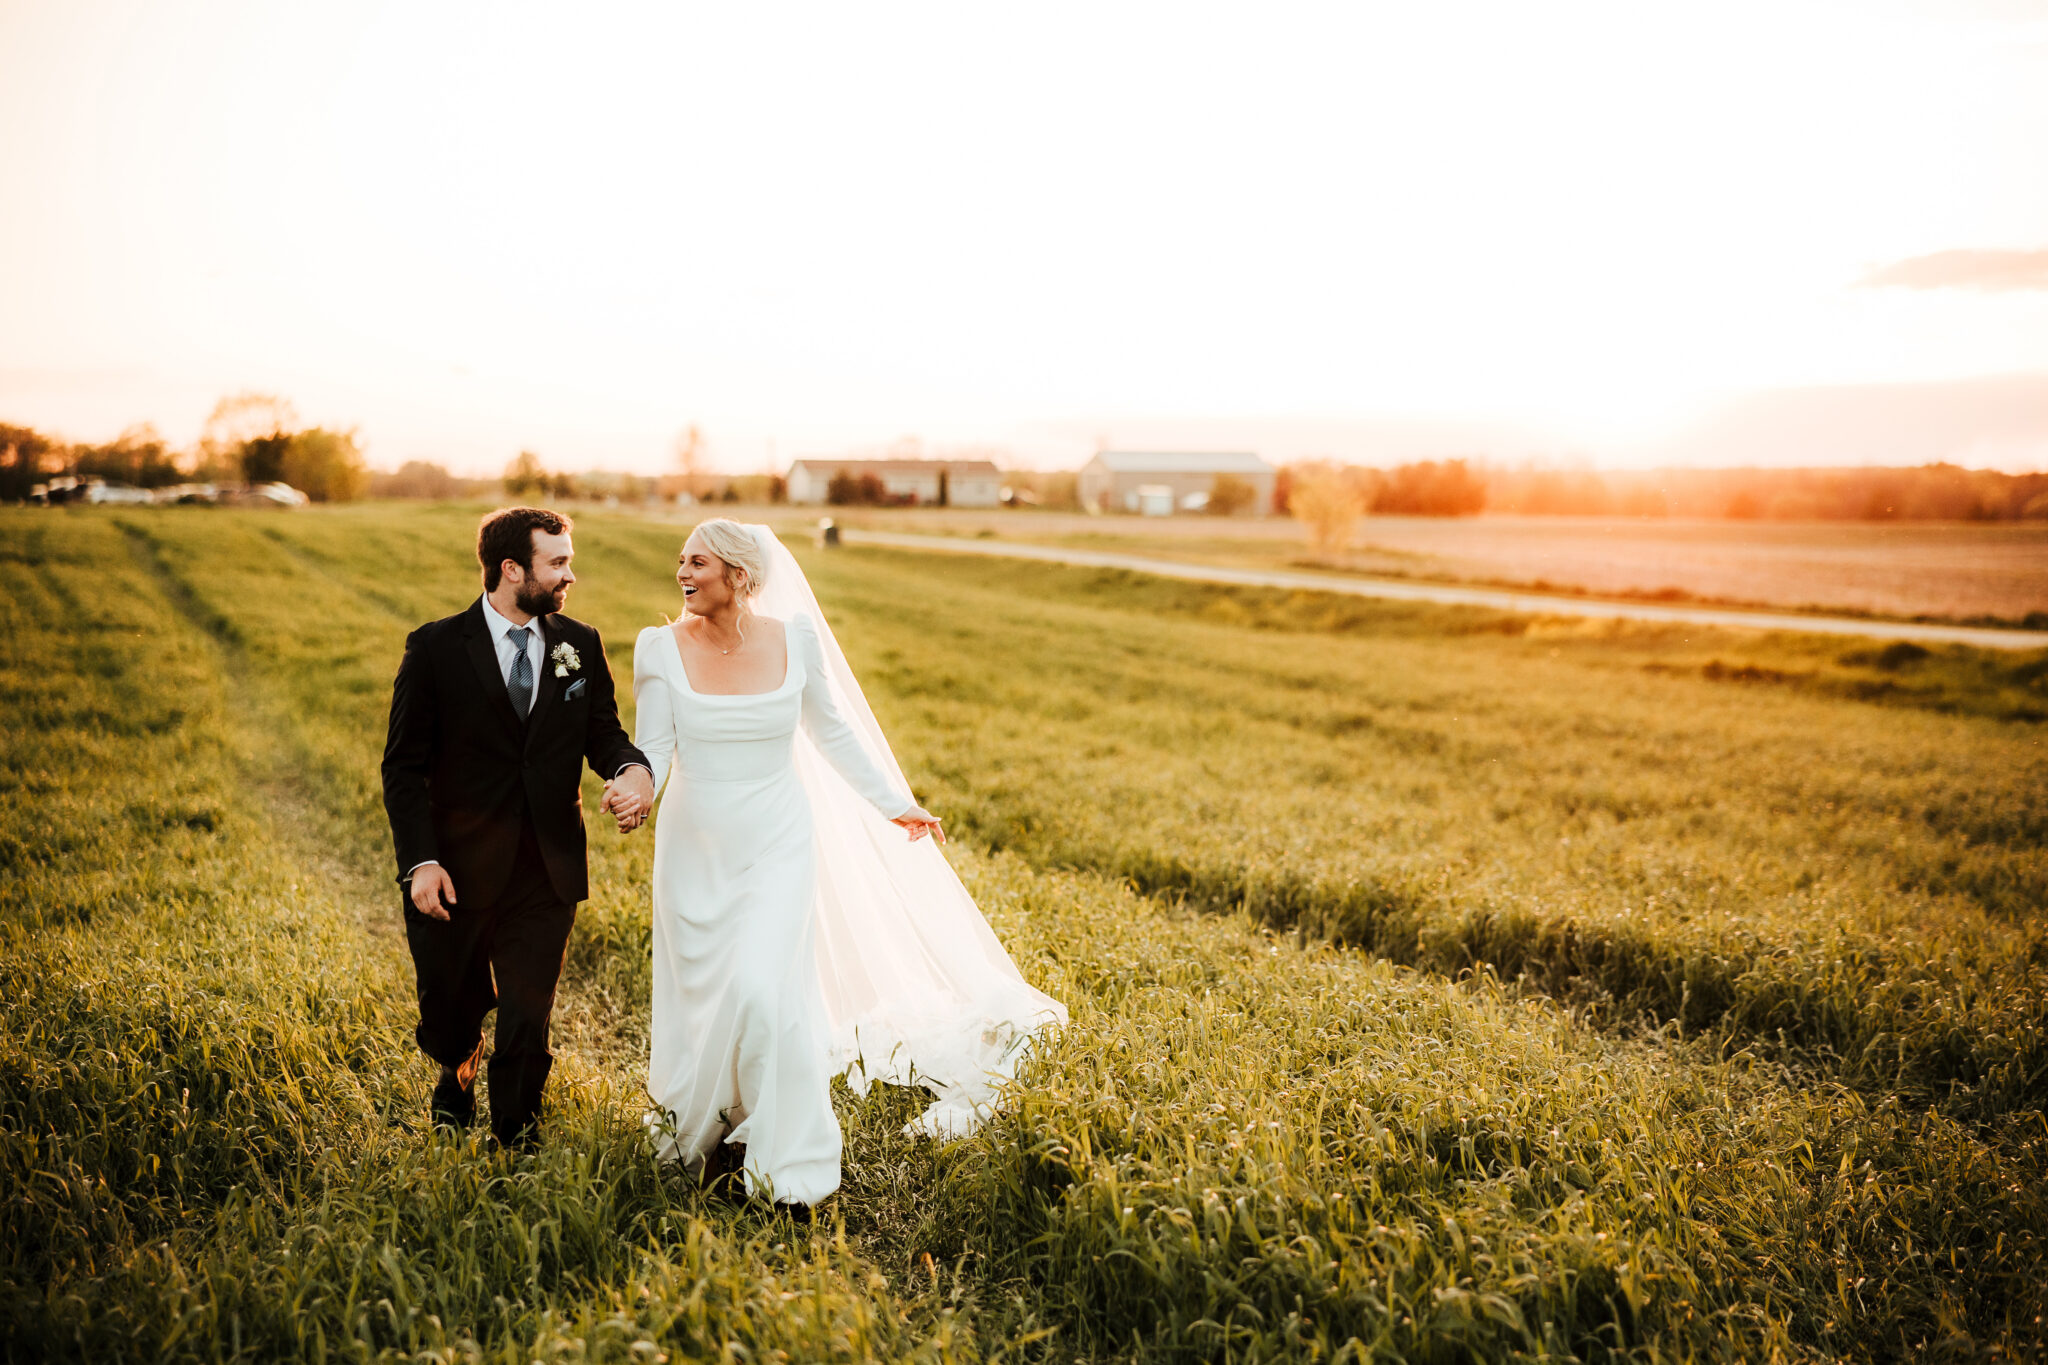 A couple runs joyfully through a field with a rustic barn in the background, silhouetted against a vibrant sunset.